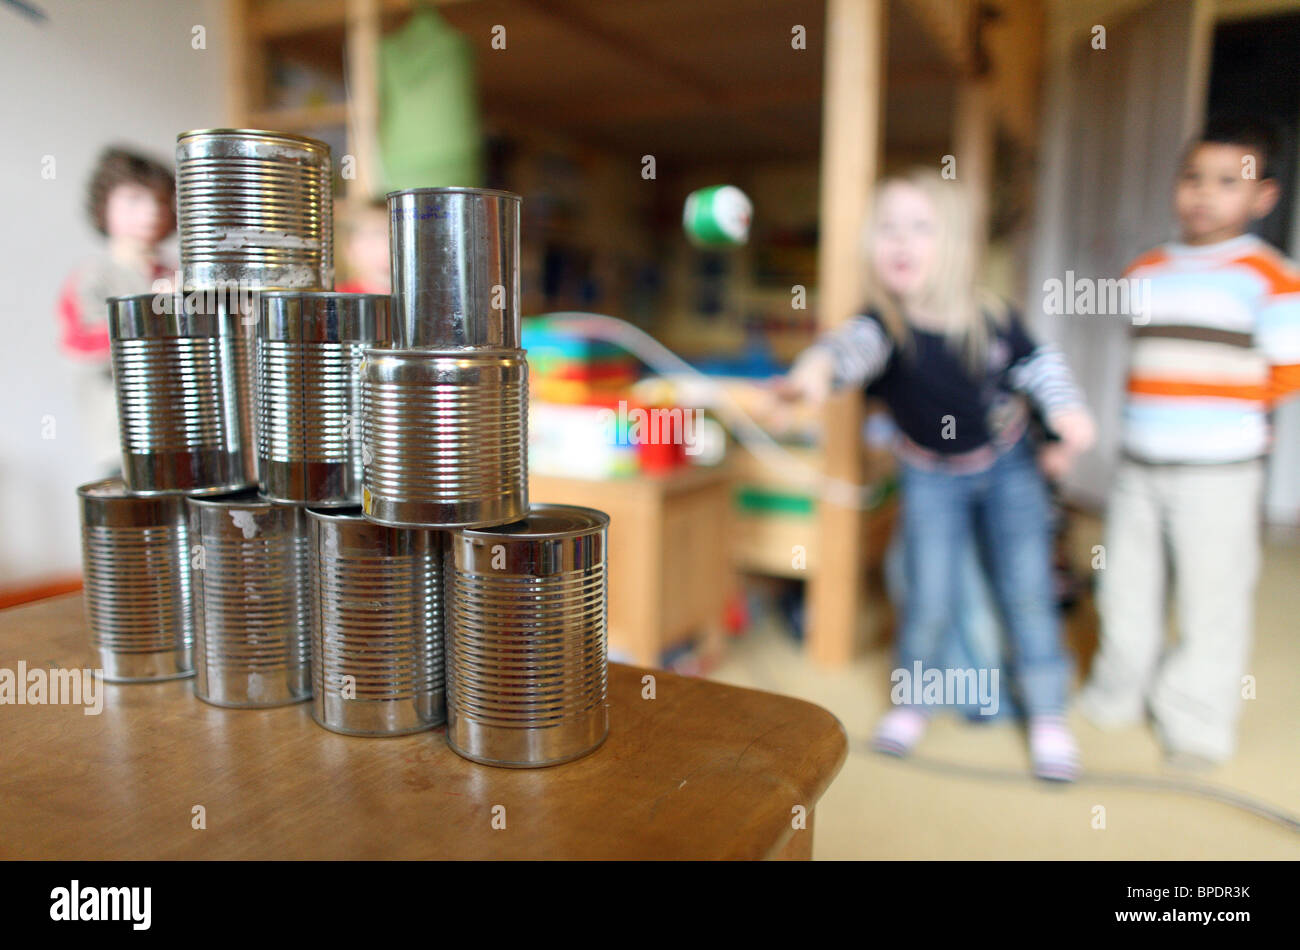 Children throwing balls at empty tins during a birthday party, Berlin, Germany Stock Photo